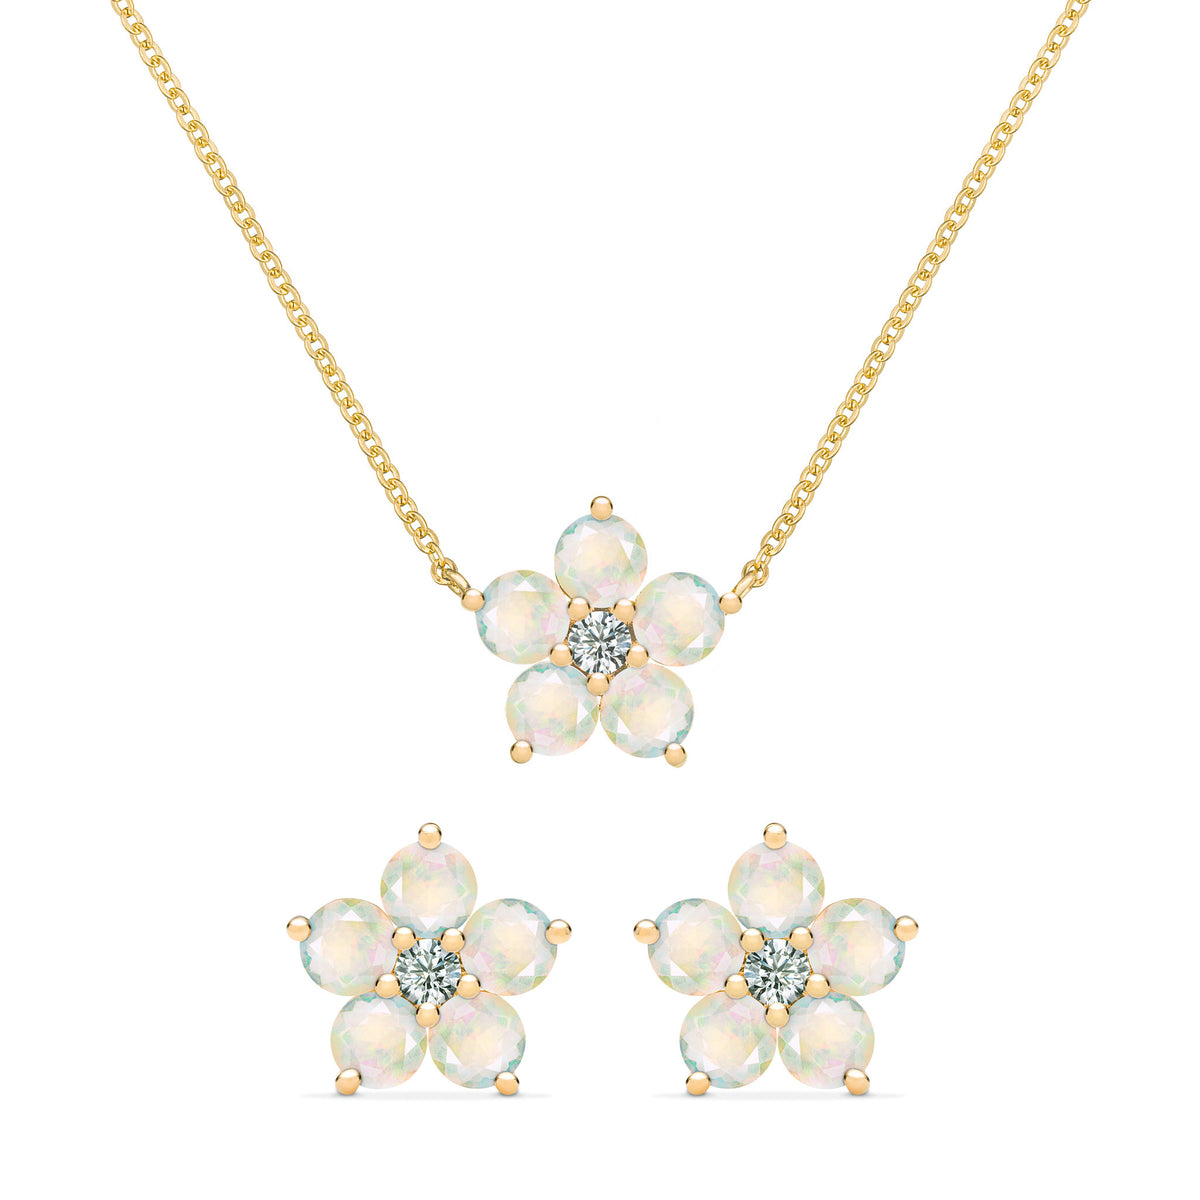 TAI SILVER WITH MAN MADE OPAL NECKLACE & EARRING SET – Paasolainen's Gifts